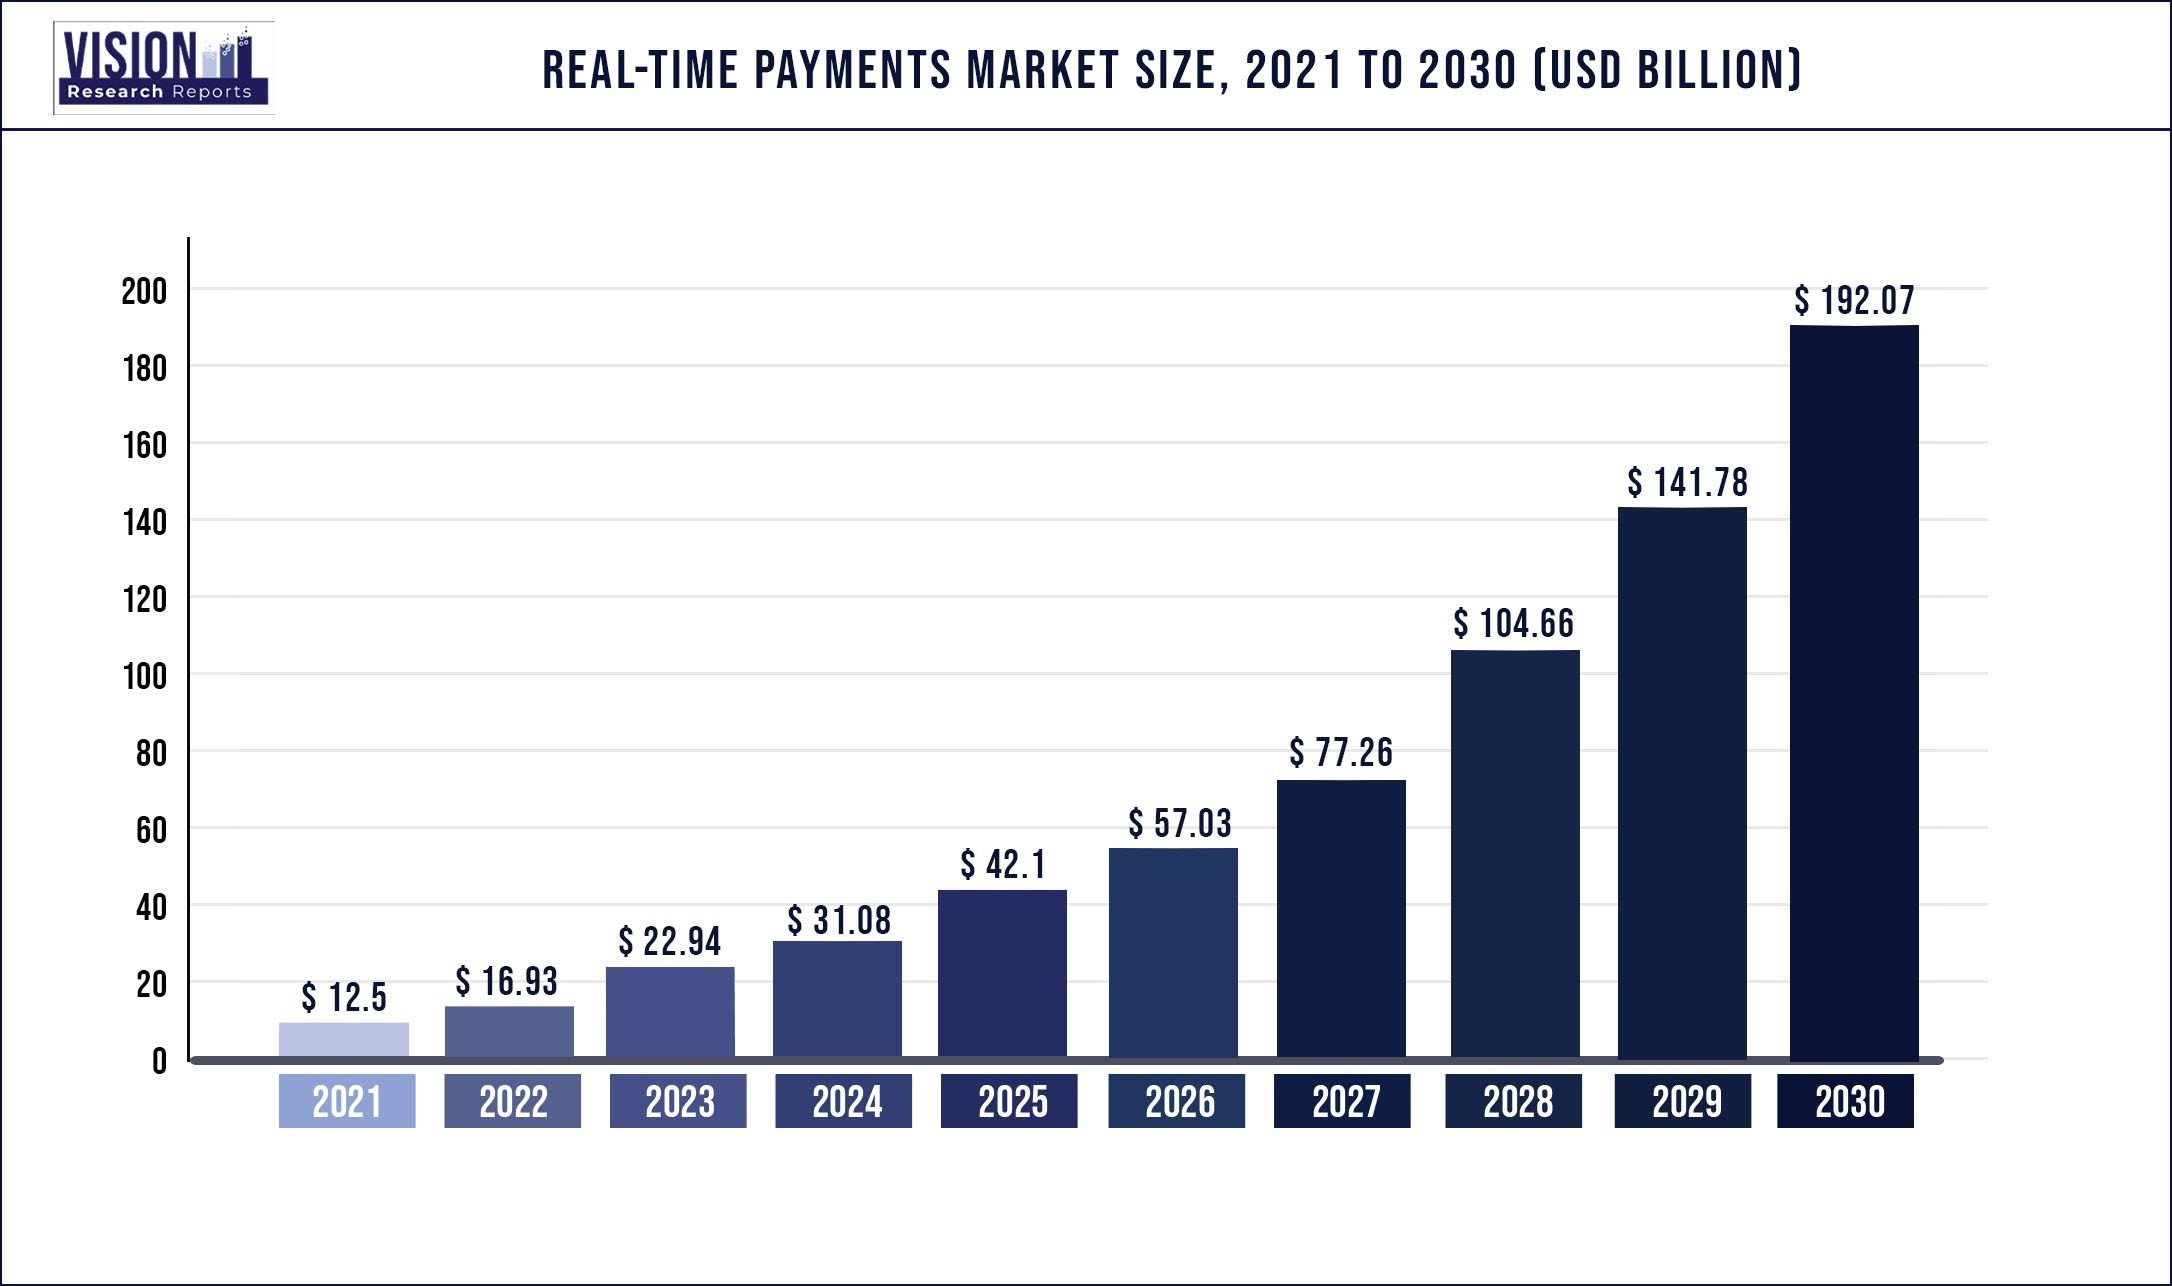 Real-Time Payments Market Size 2021 to 2030